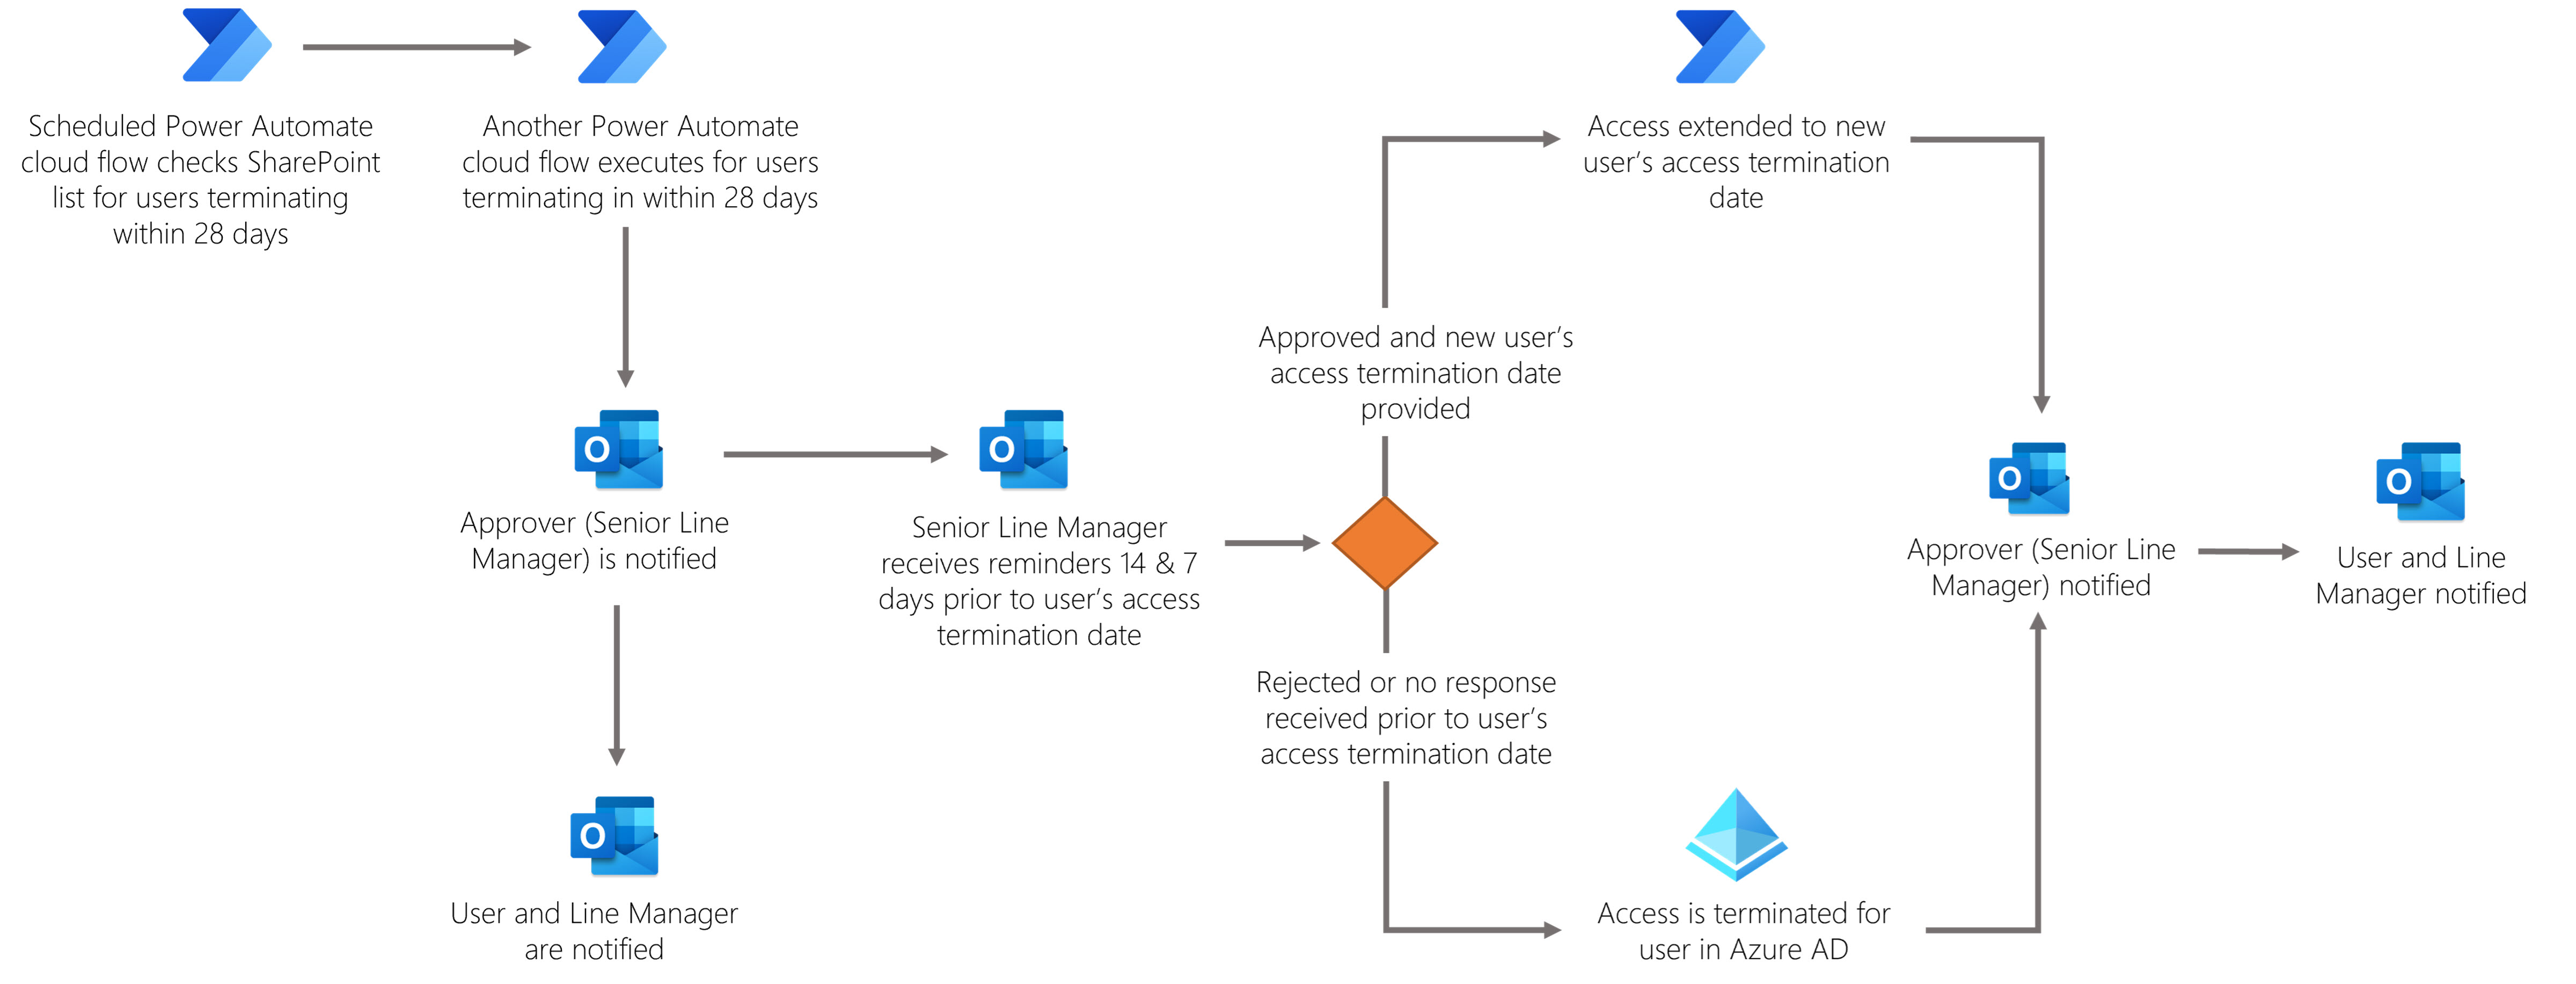 Automated access extension approval for the internal application.